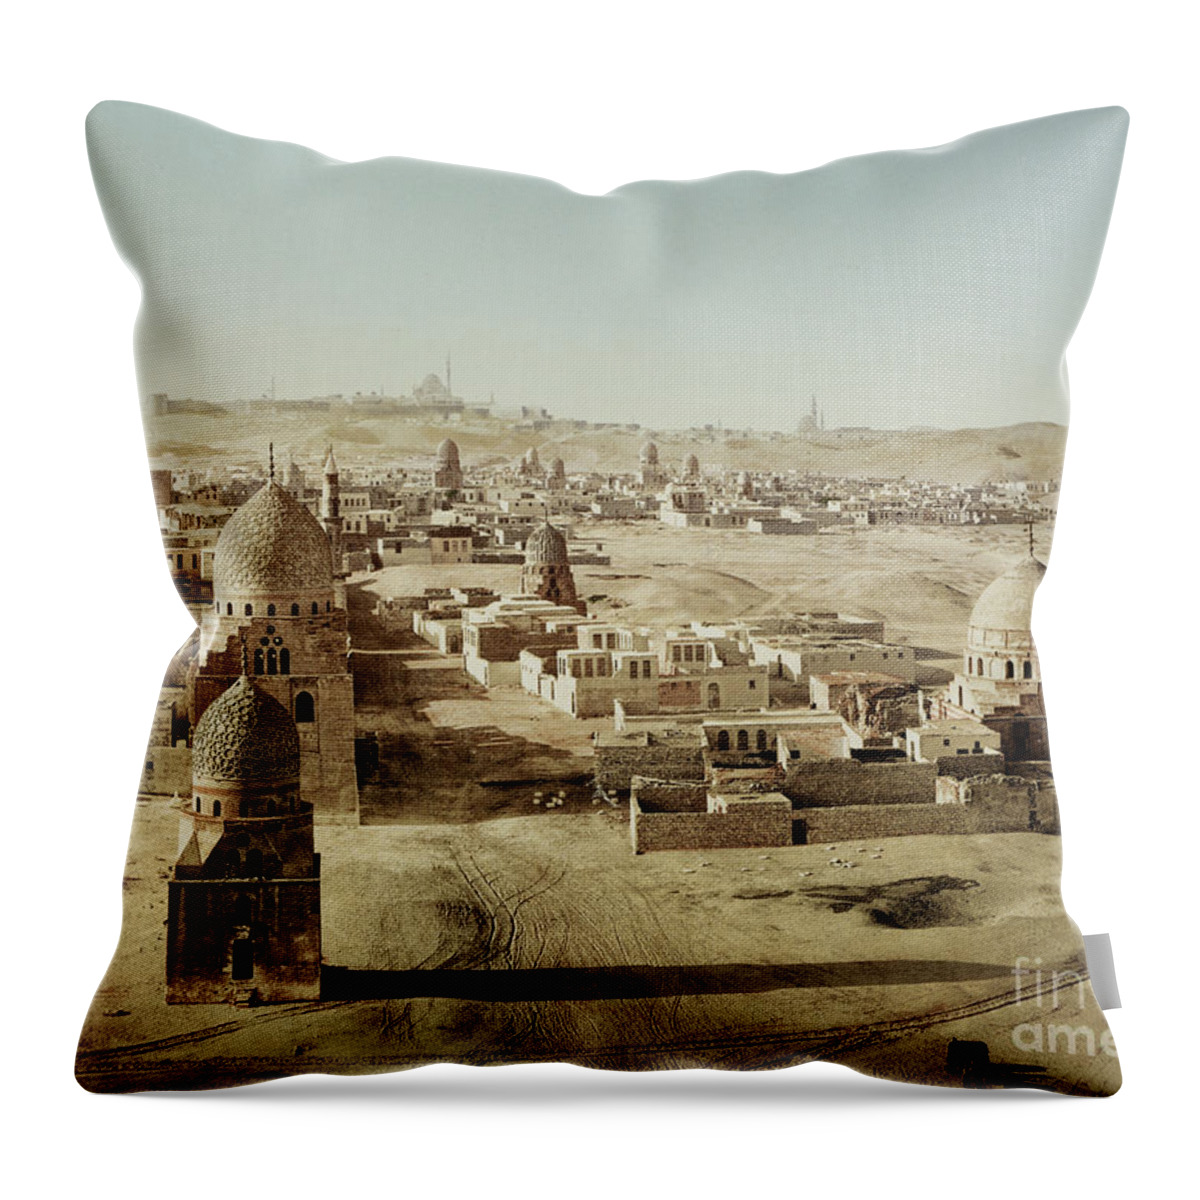 Tombs Throw Pillow featuring the photograph Tombs Of The Mamelukes, Cairo, Egypt by Getty Research Institute